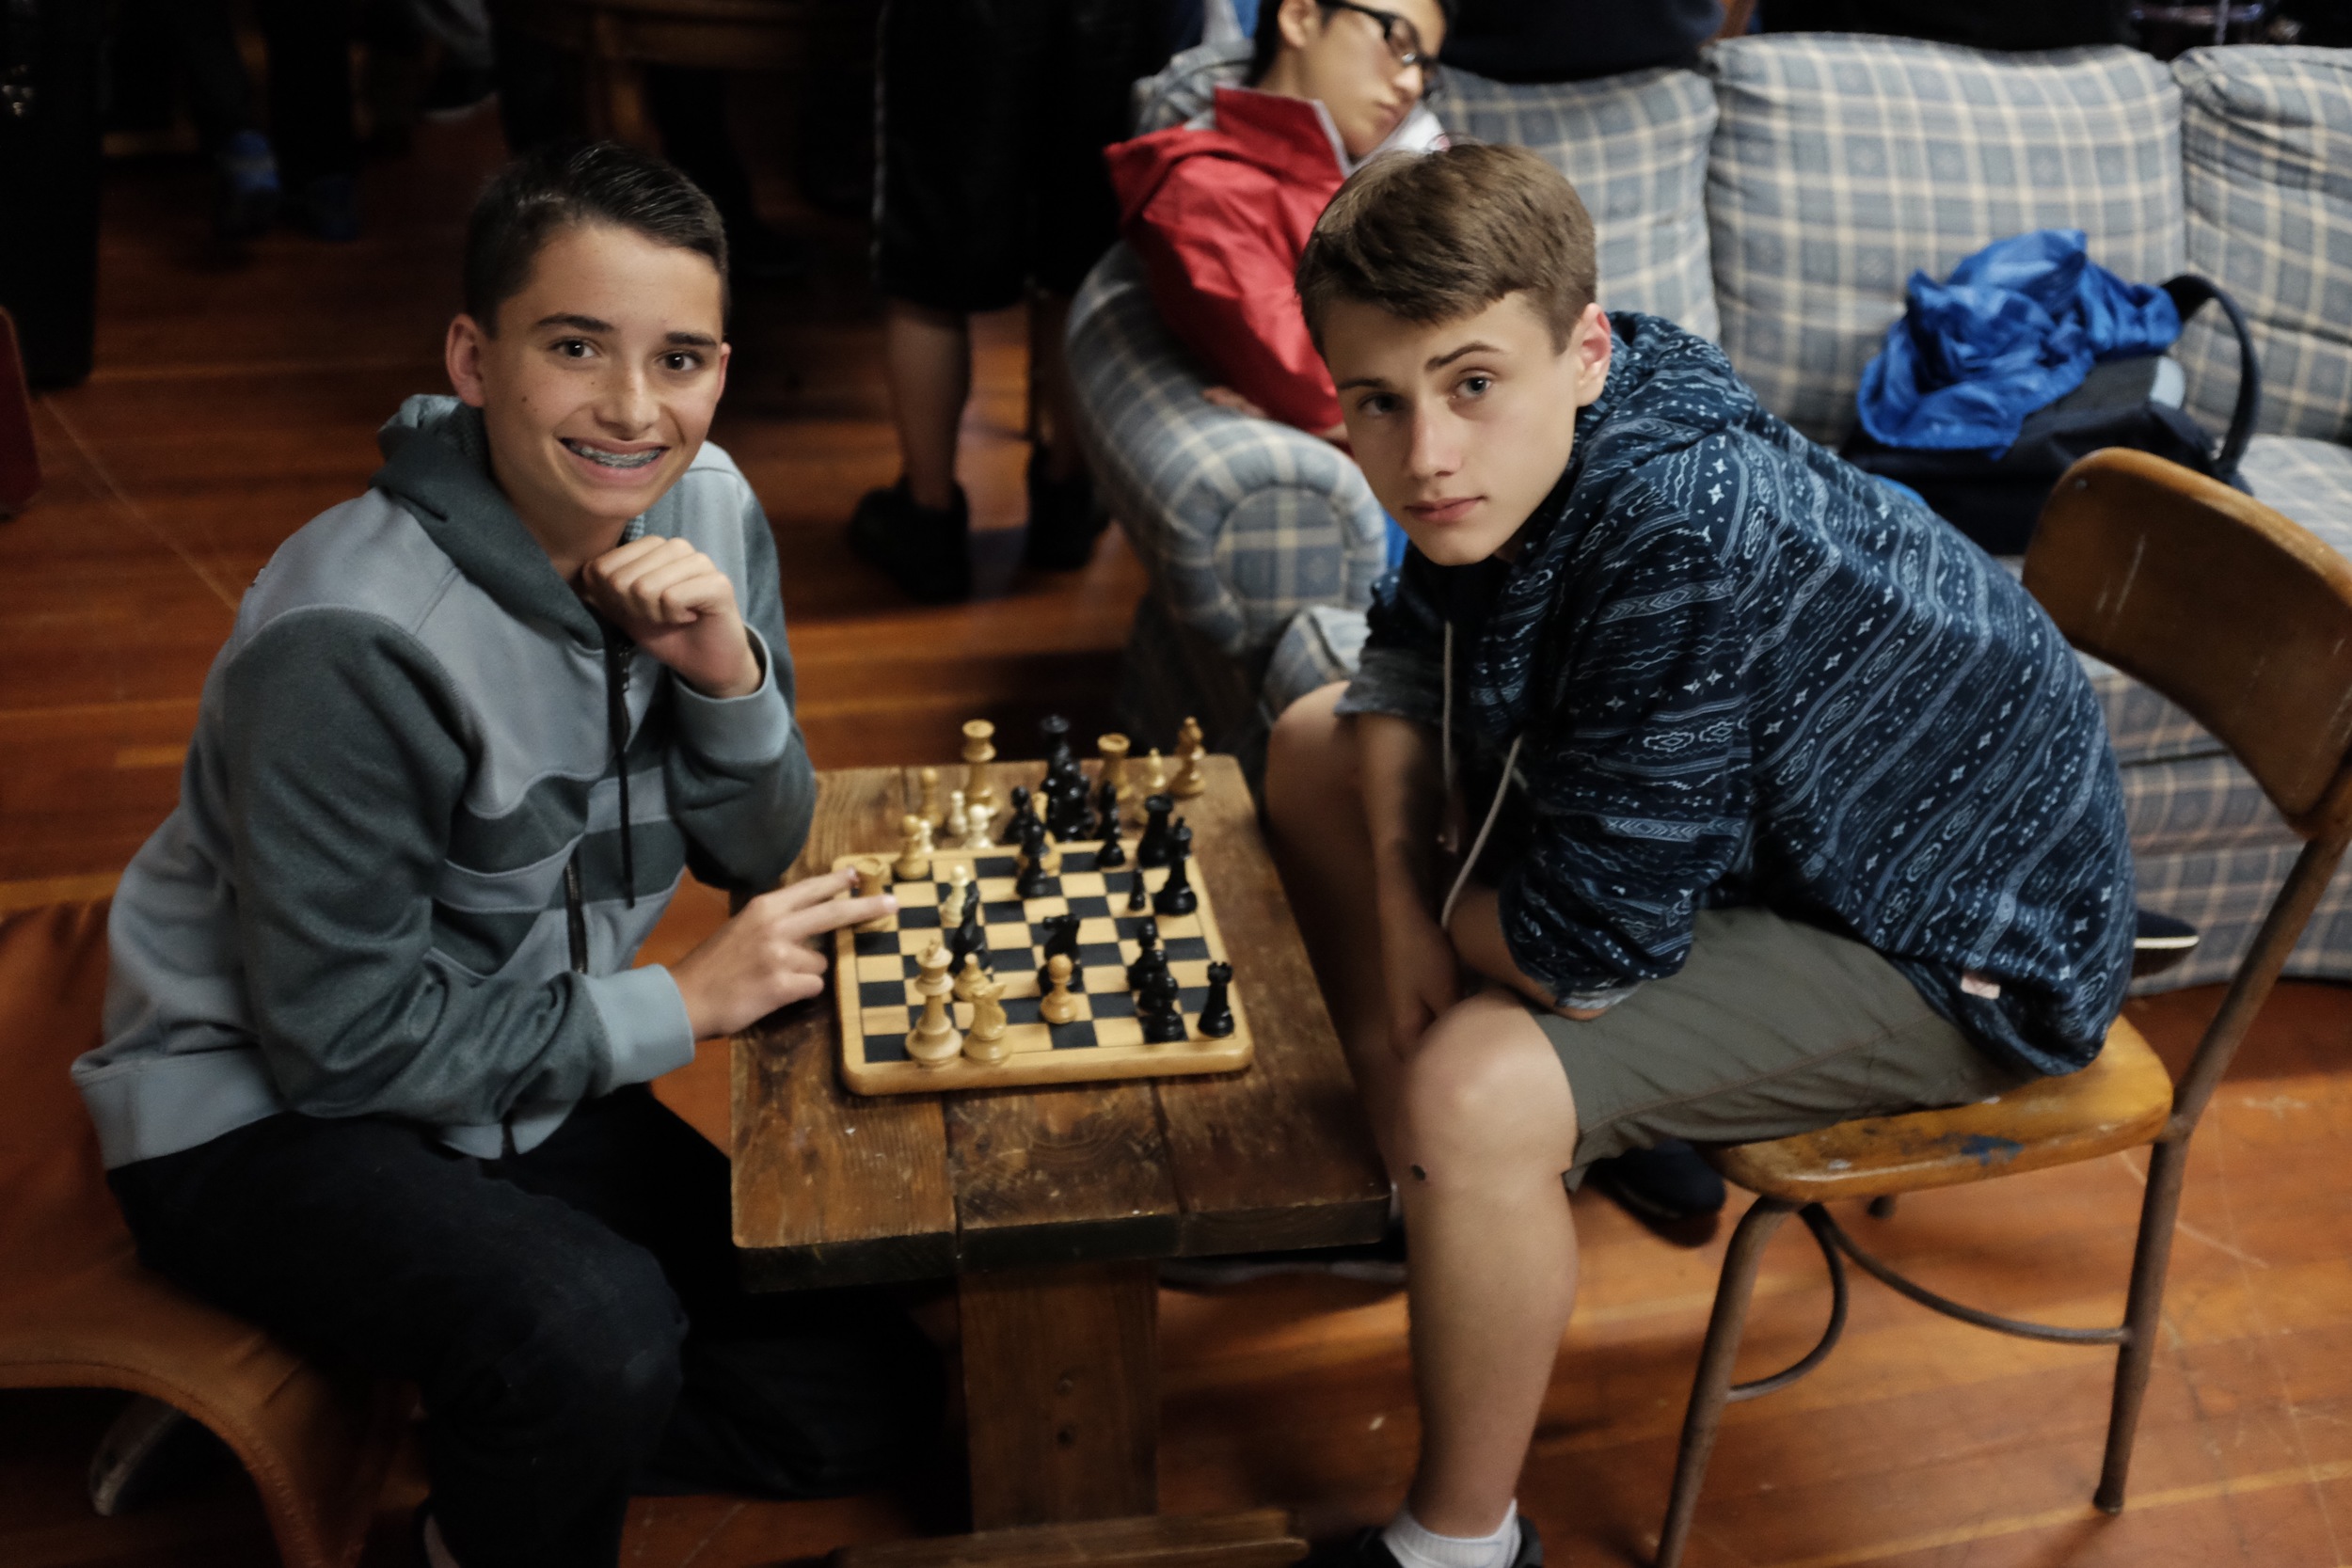  Two campers play a competitive game of chess 